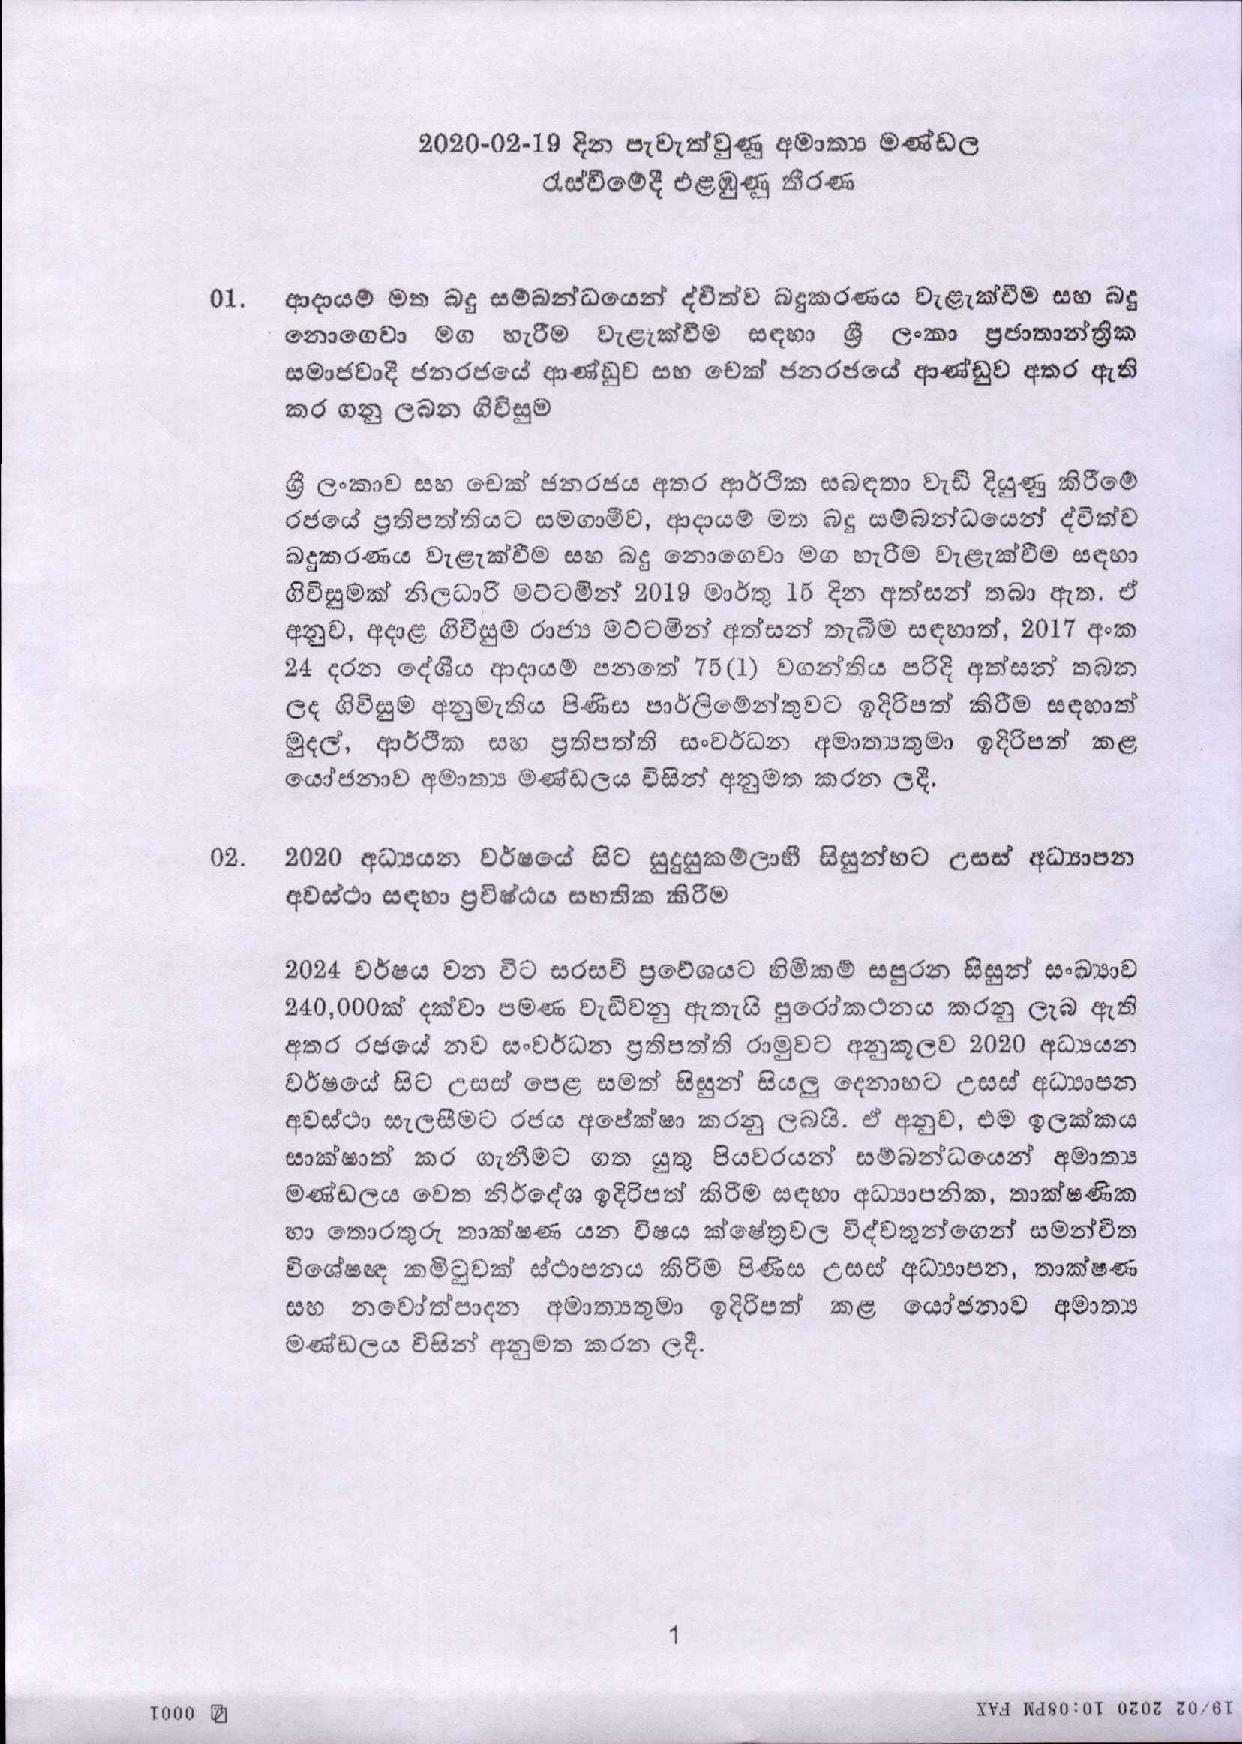 1 Cabinet Decision on 19.02.2020 Full document page 001